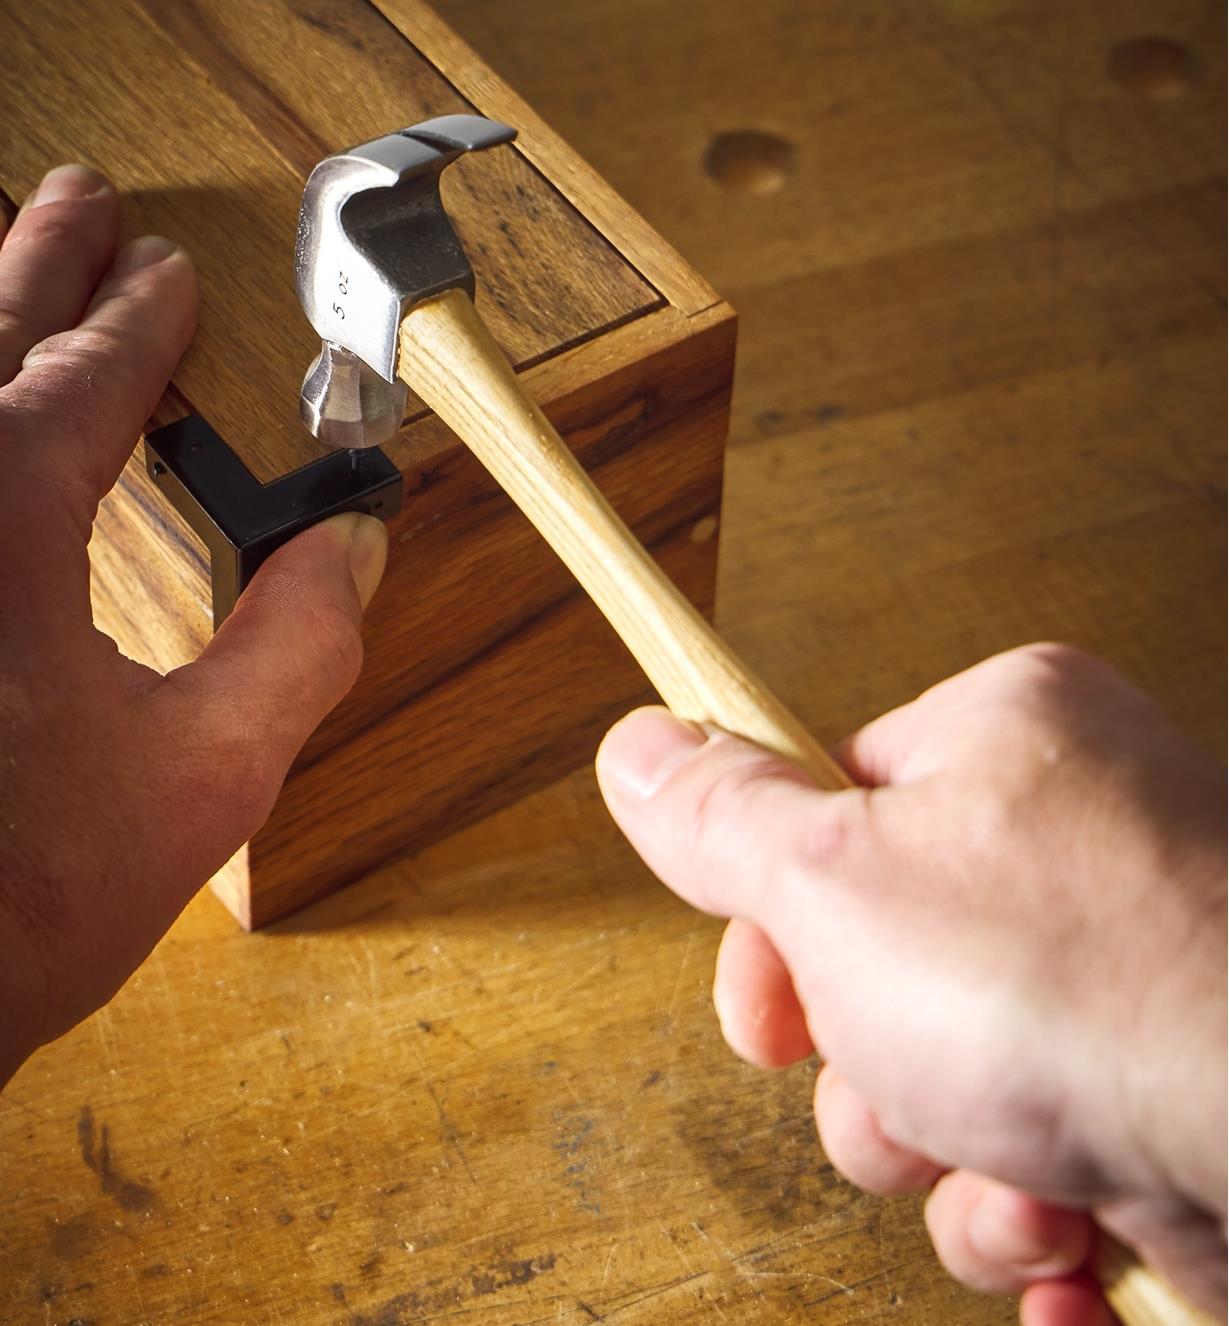 Using a 5 oz hammer to drive a small nail into a wooden box